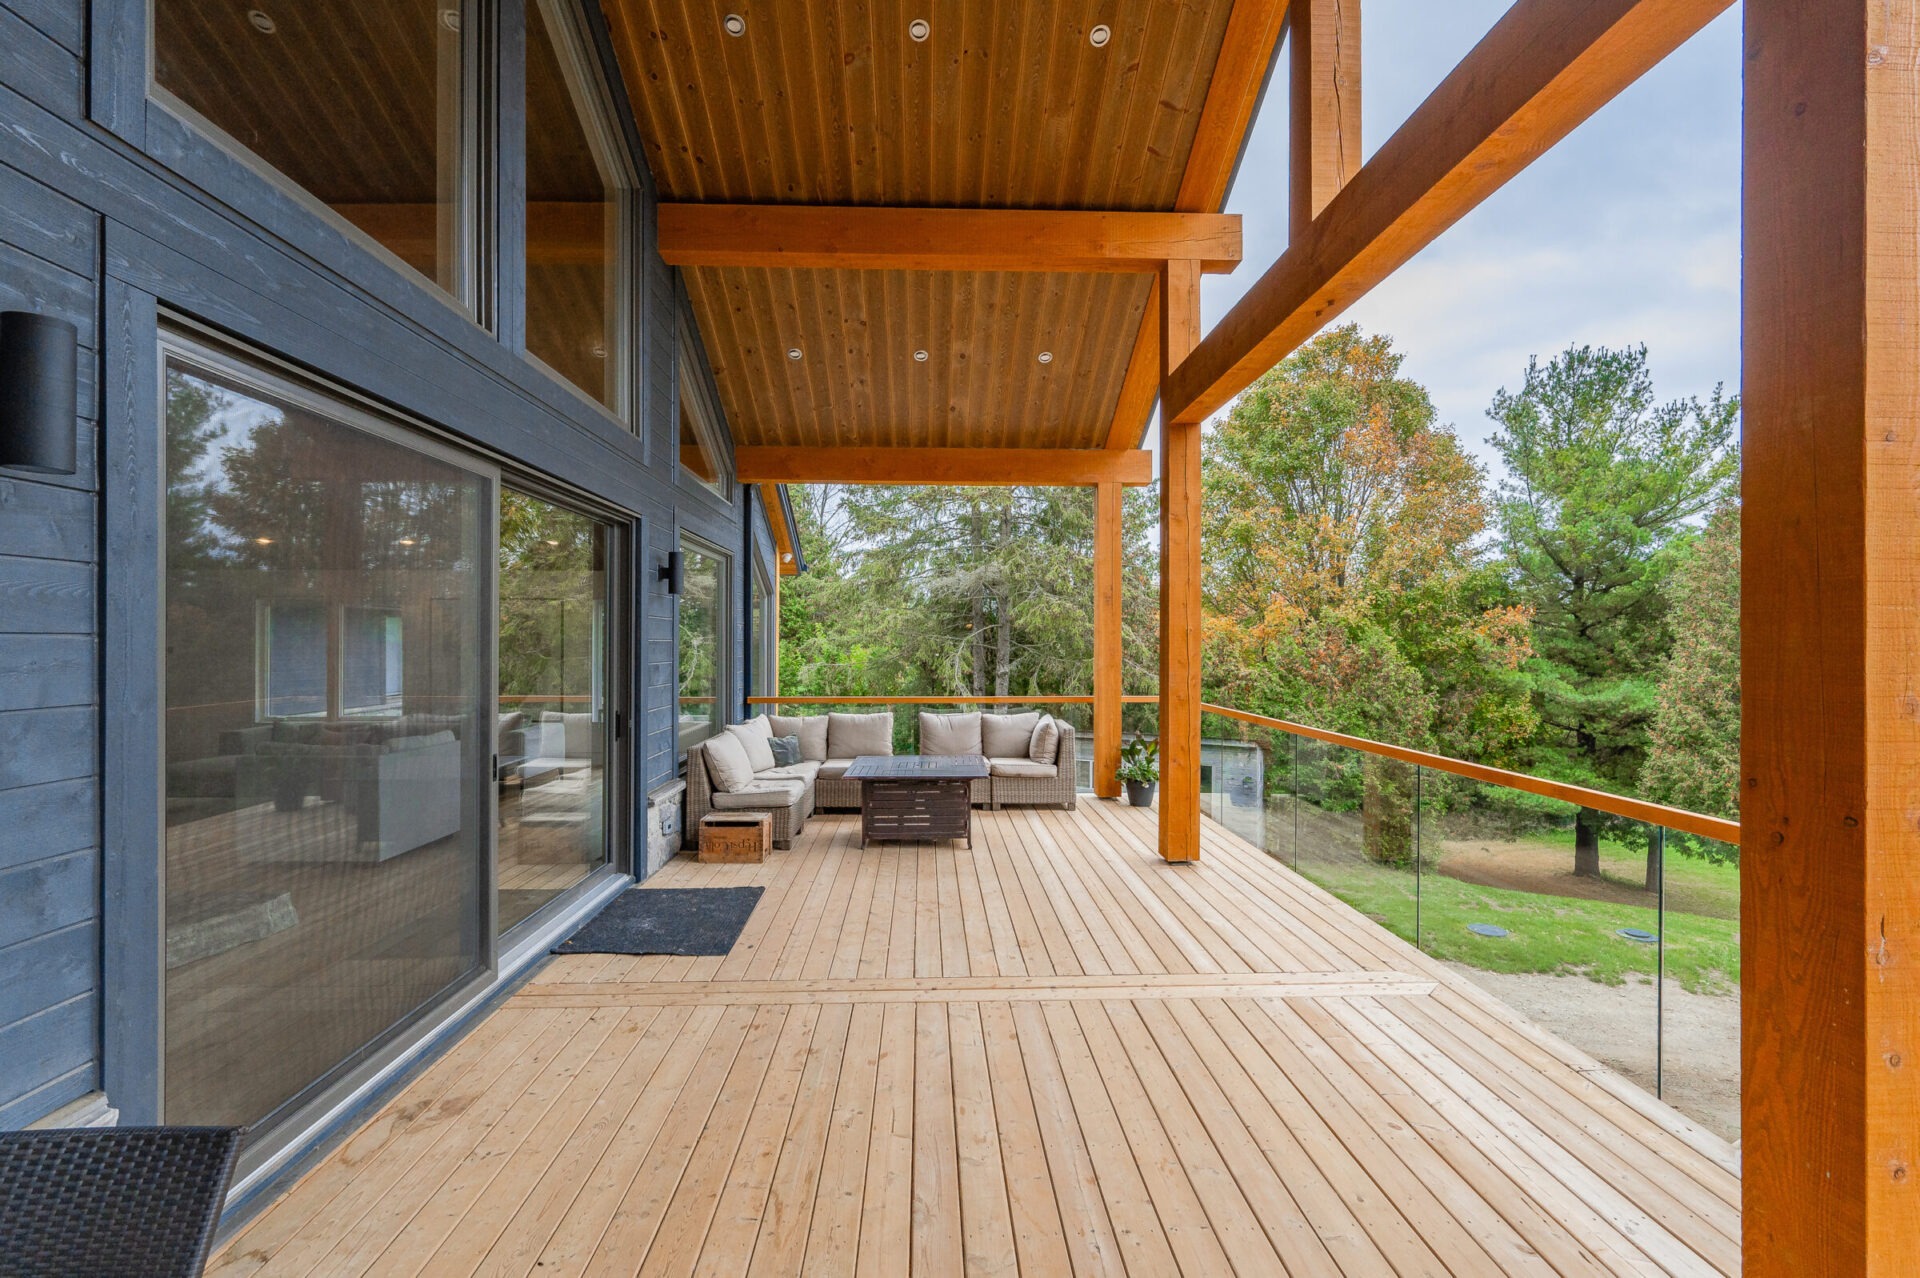 A spacious wooden deck with modern outdoor furniture overlooks a tranquil forest. The home features large glass doors and a wooden beam structure.